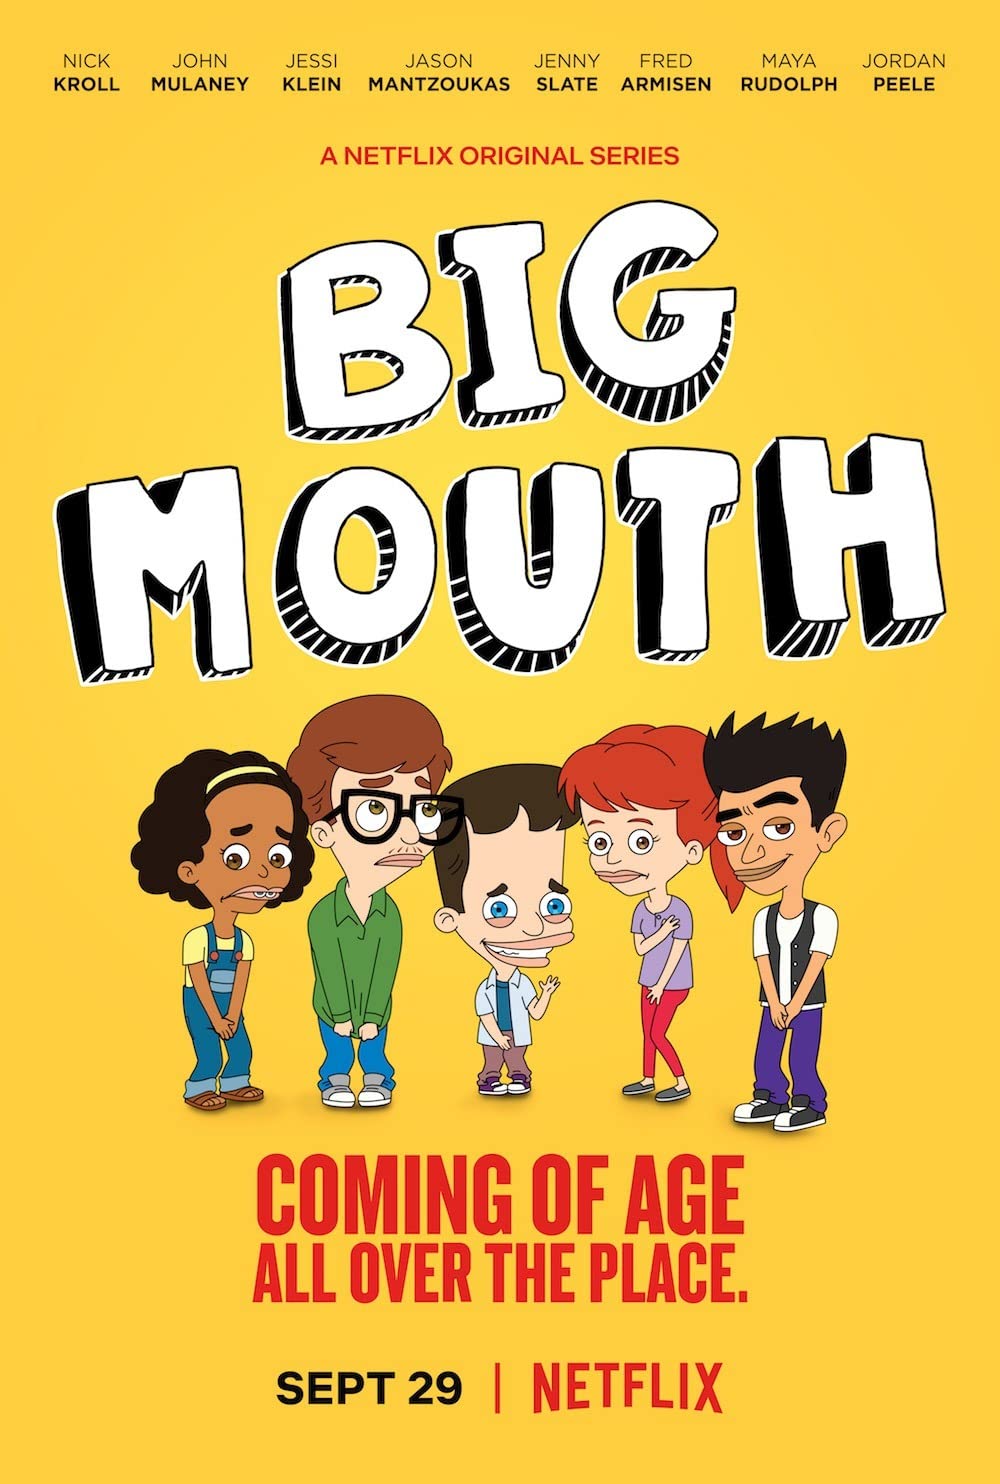 Netflix Big Mouth Season 4 Trailer, Netflix Animated Shows, Netflix Comedy Shows, Coming to Netflix in December 2020